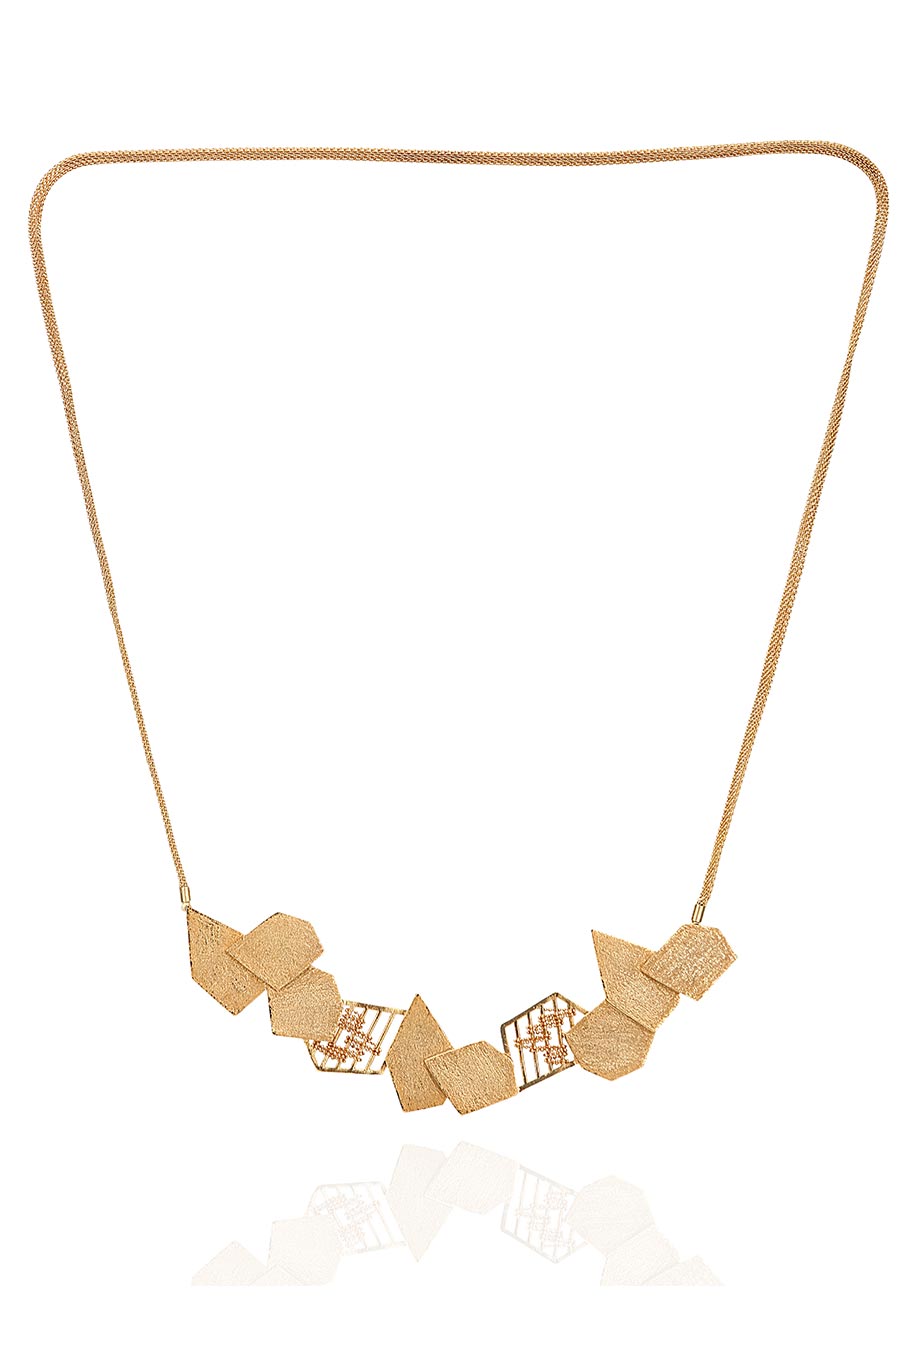 Abstract Textured Gold Plated Necklace